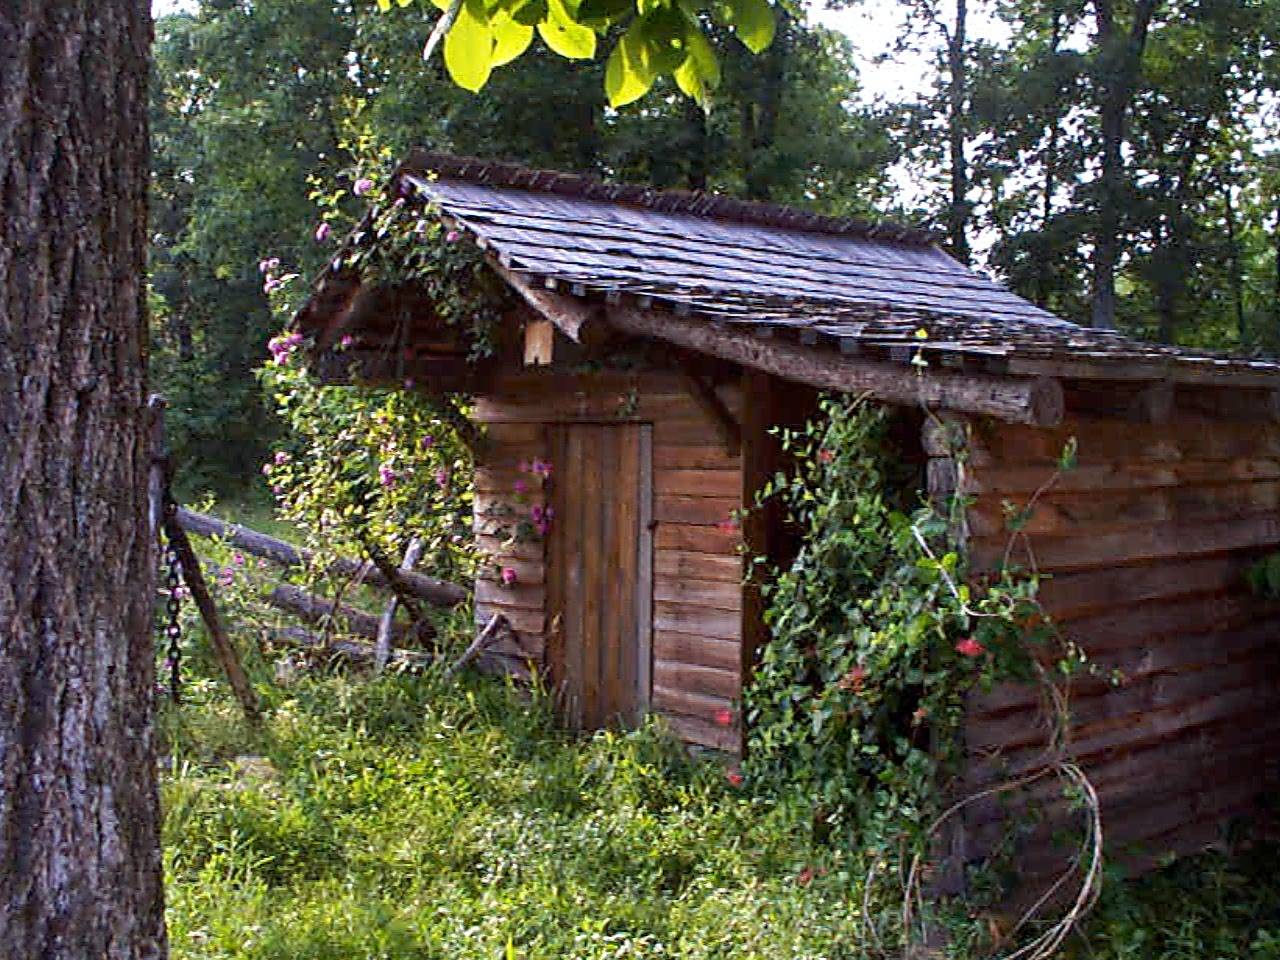 wash-house and shed